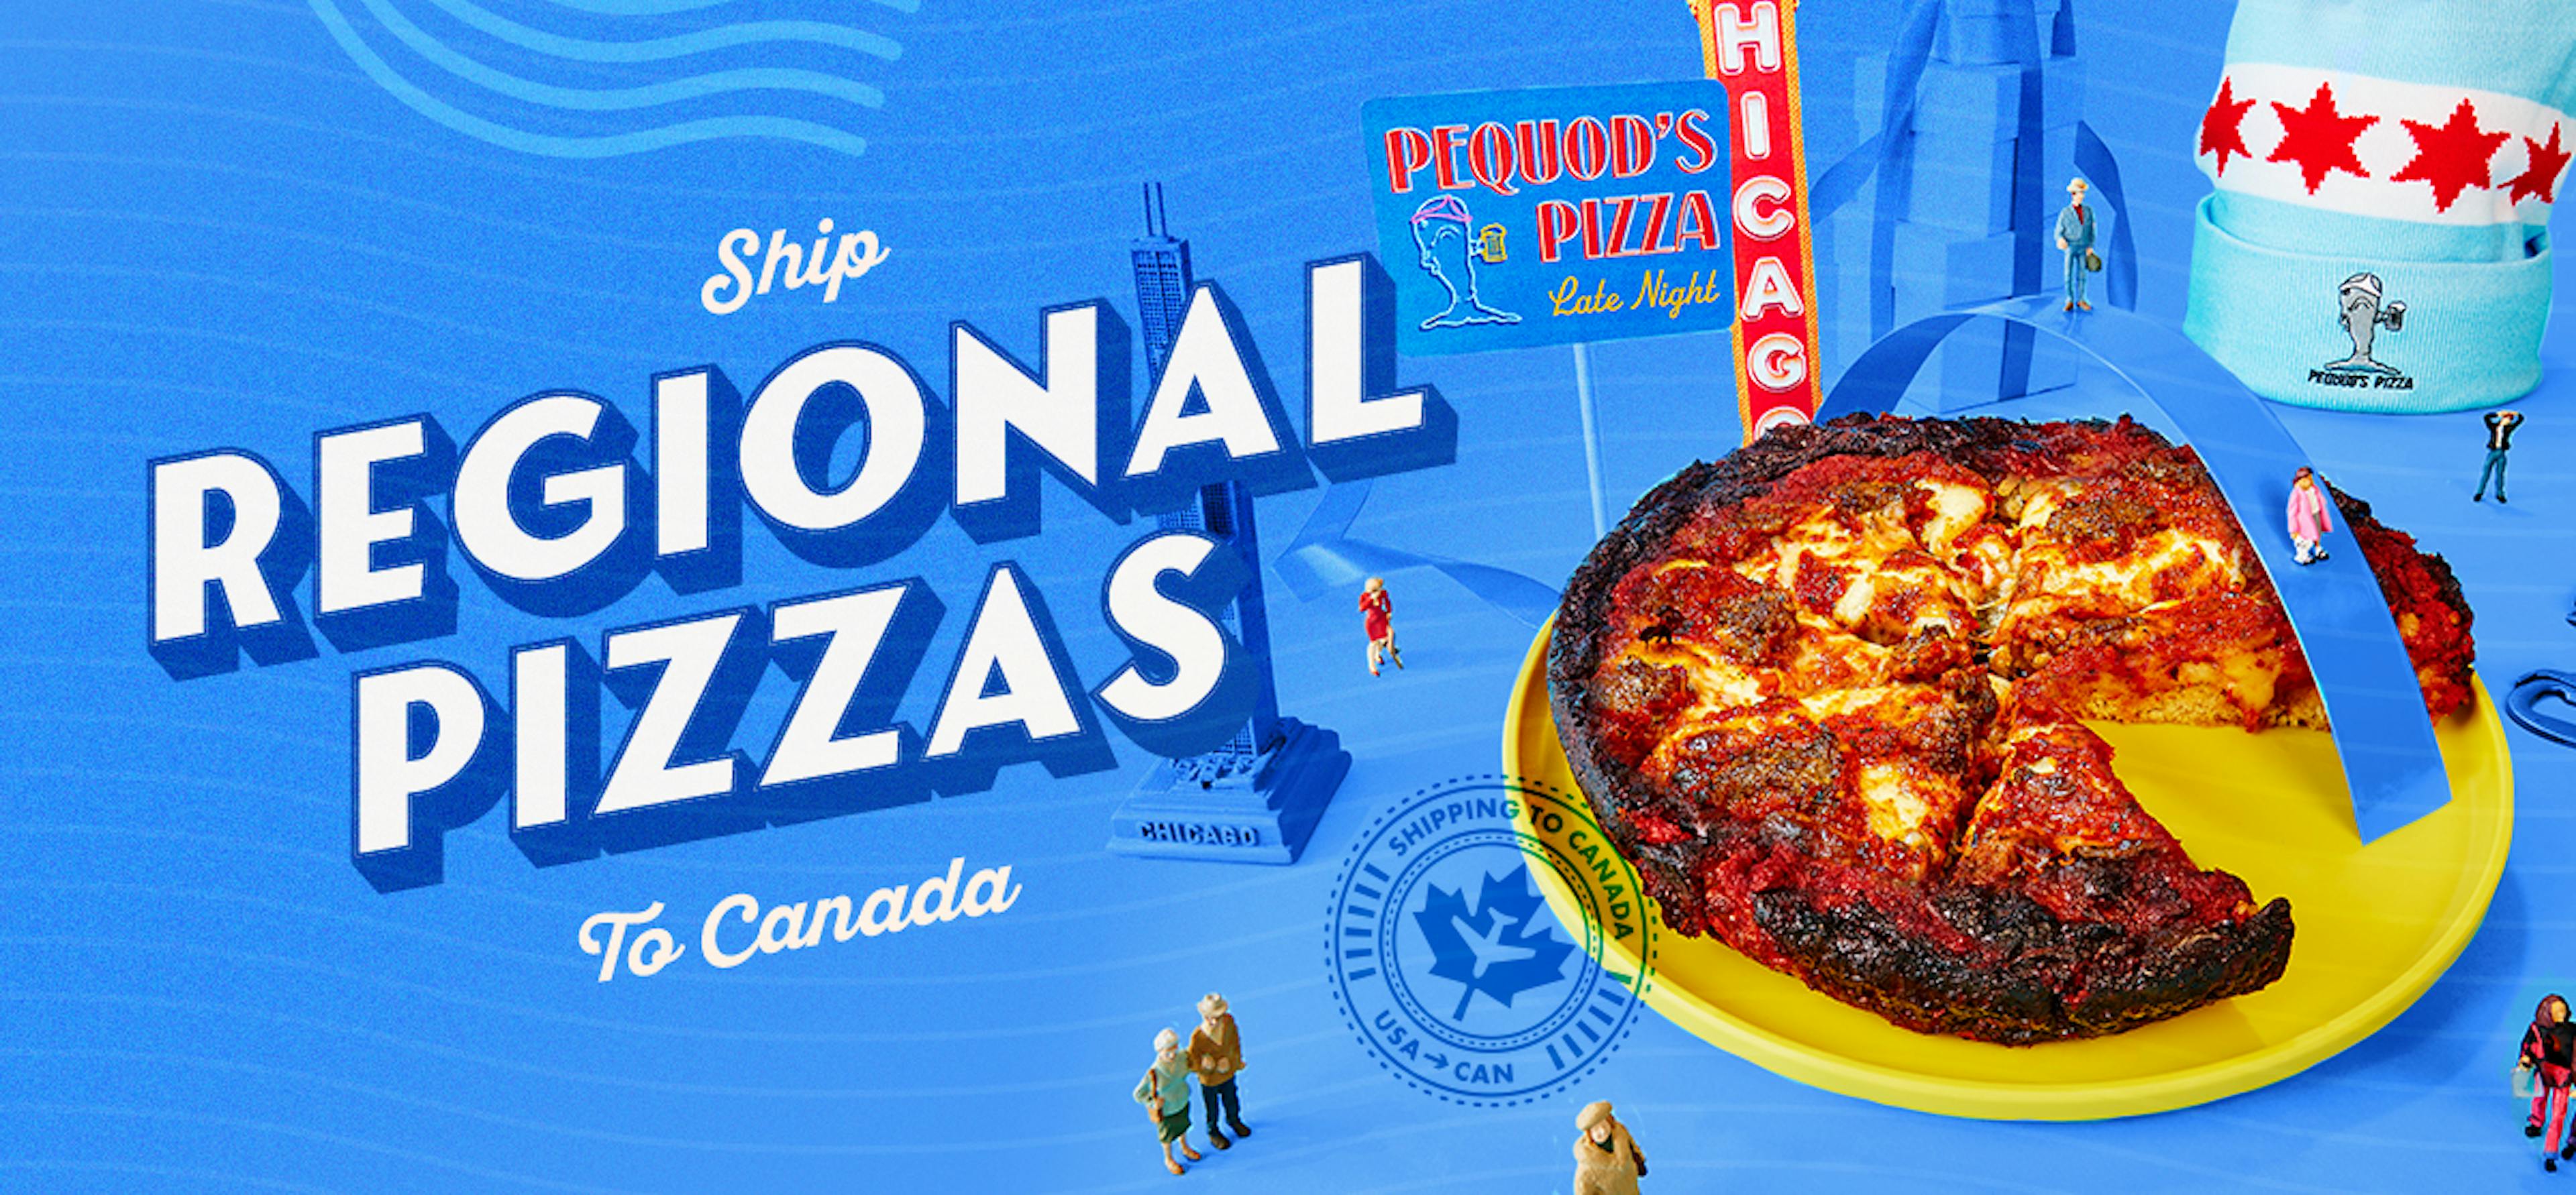 Pizzas that Ship to Canada